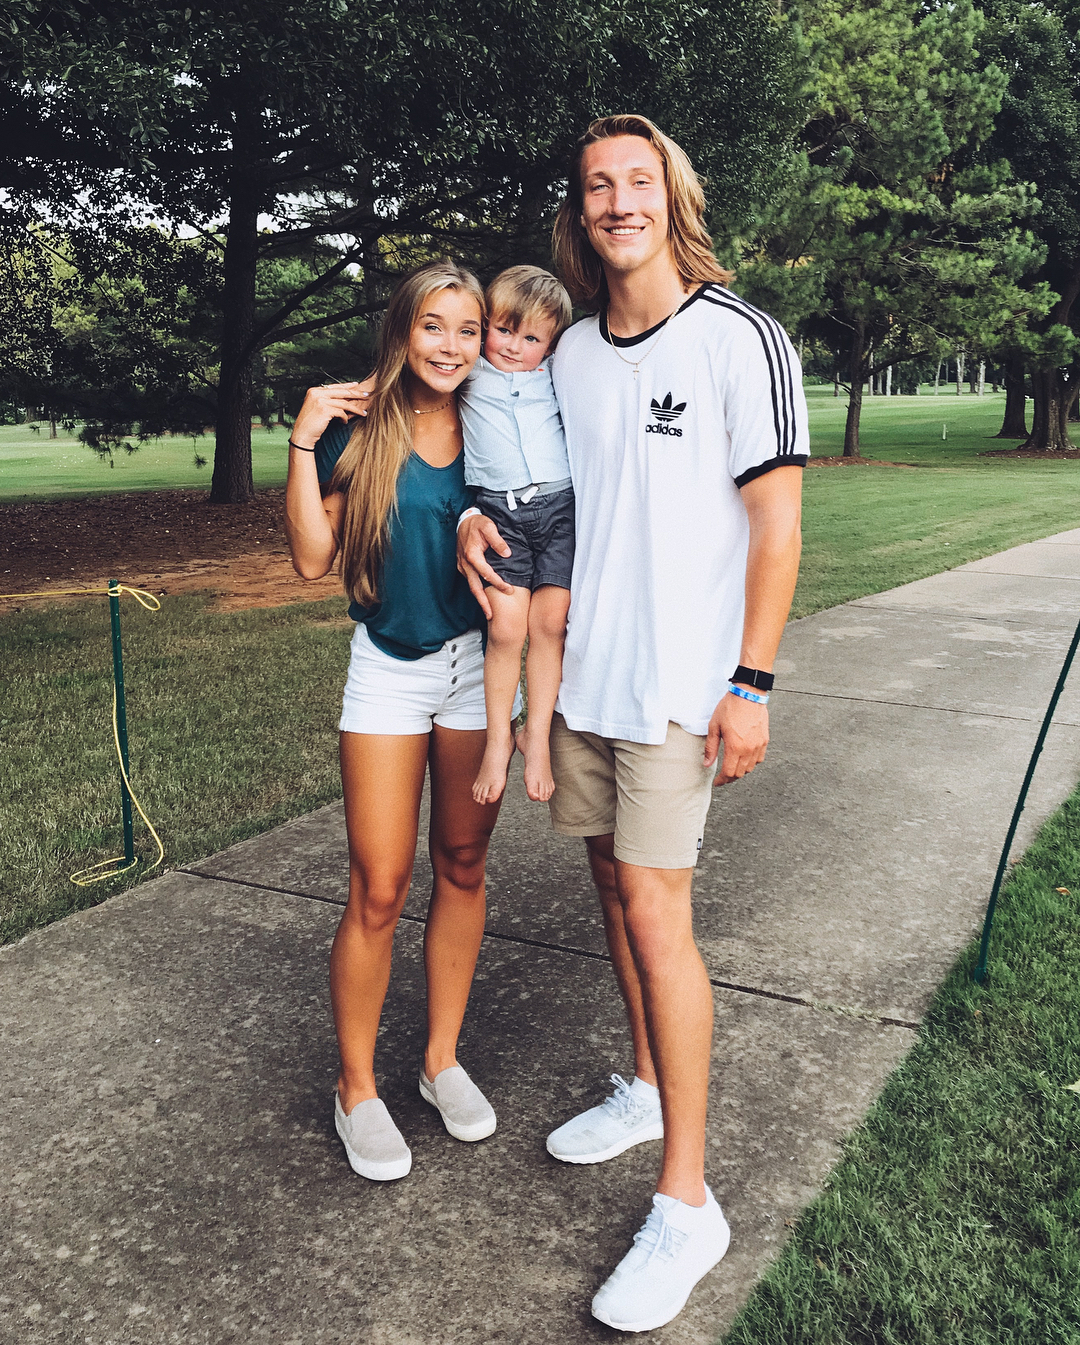 Did you know Trevor Lawrence is married with a kid? SEC Rant